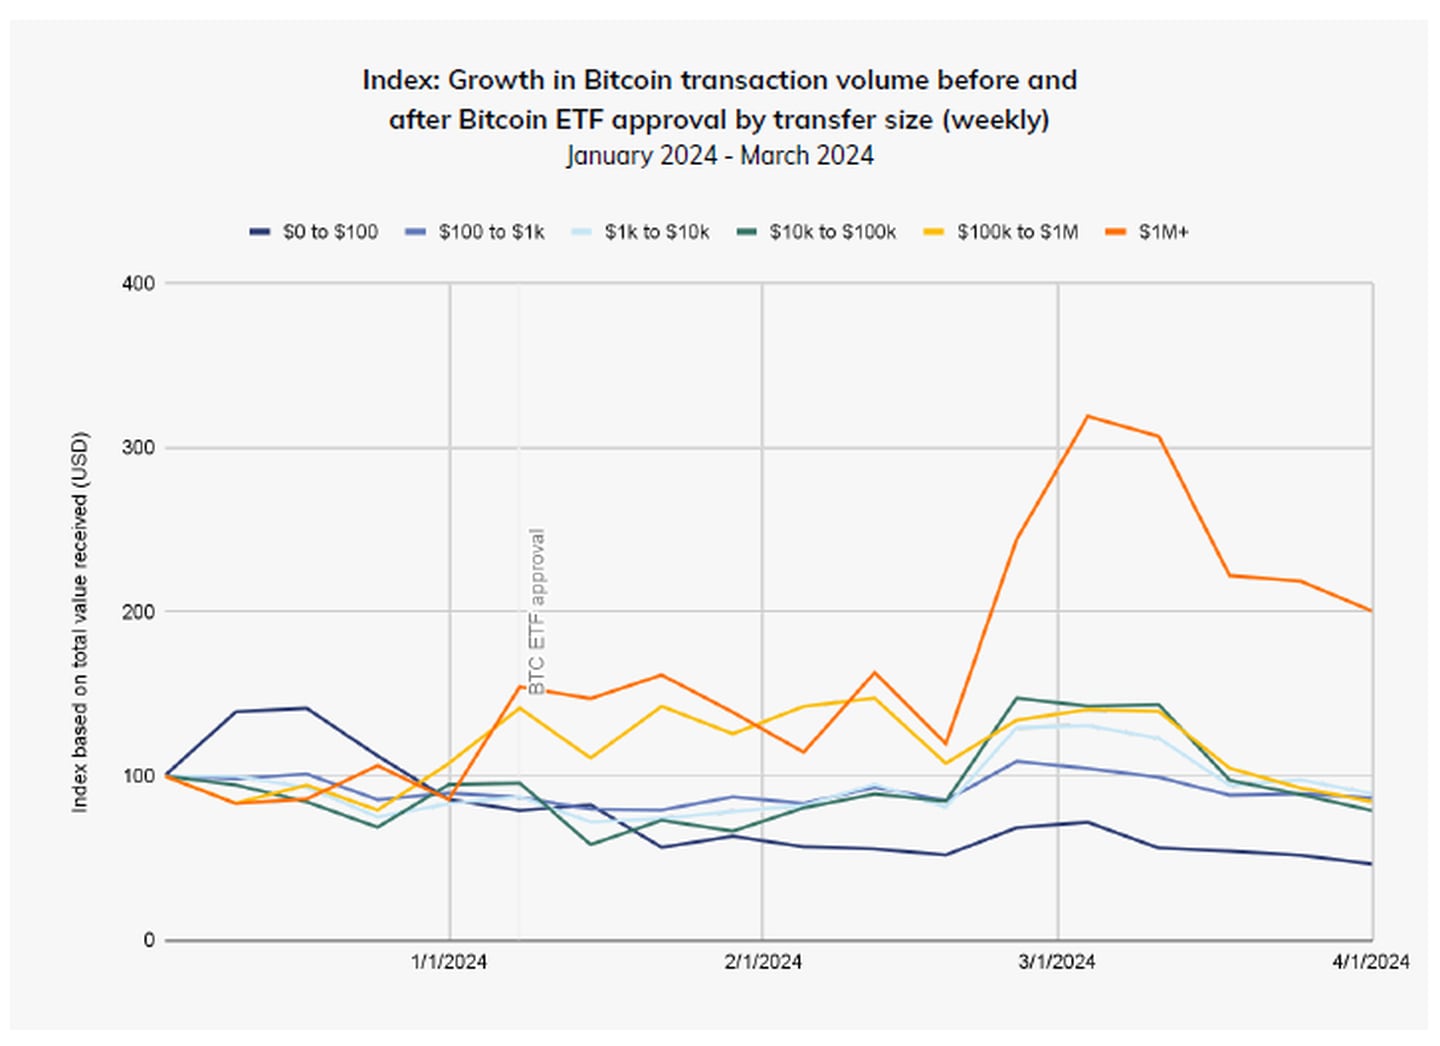 Growth in Bitcoin Transaction Volume Before and After Bitcoin ETF Approval by Transfer Size (Weekly). Source: Chainalysis